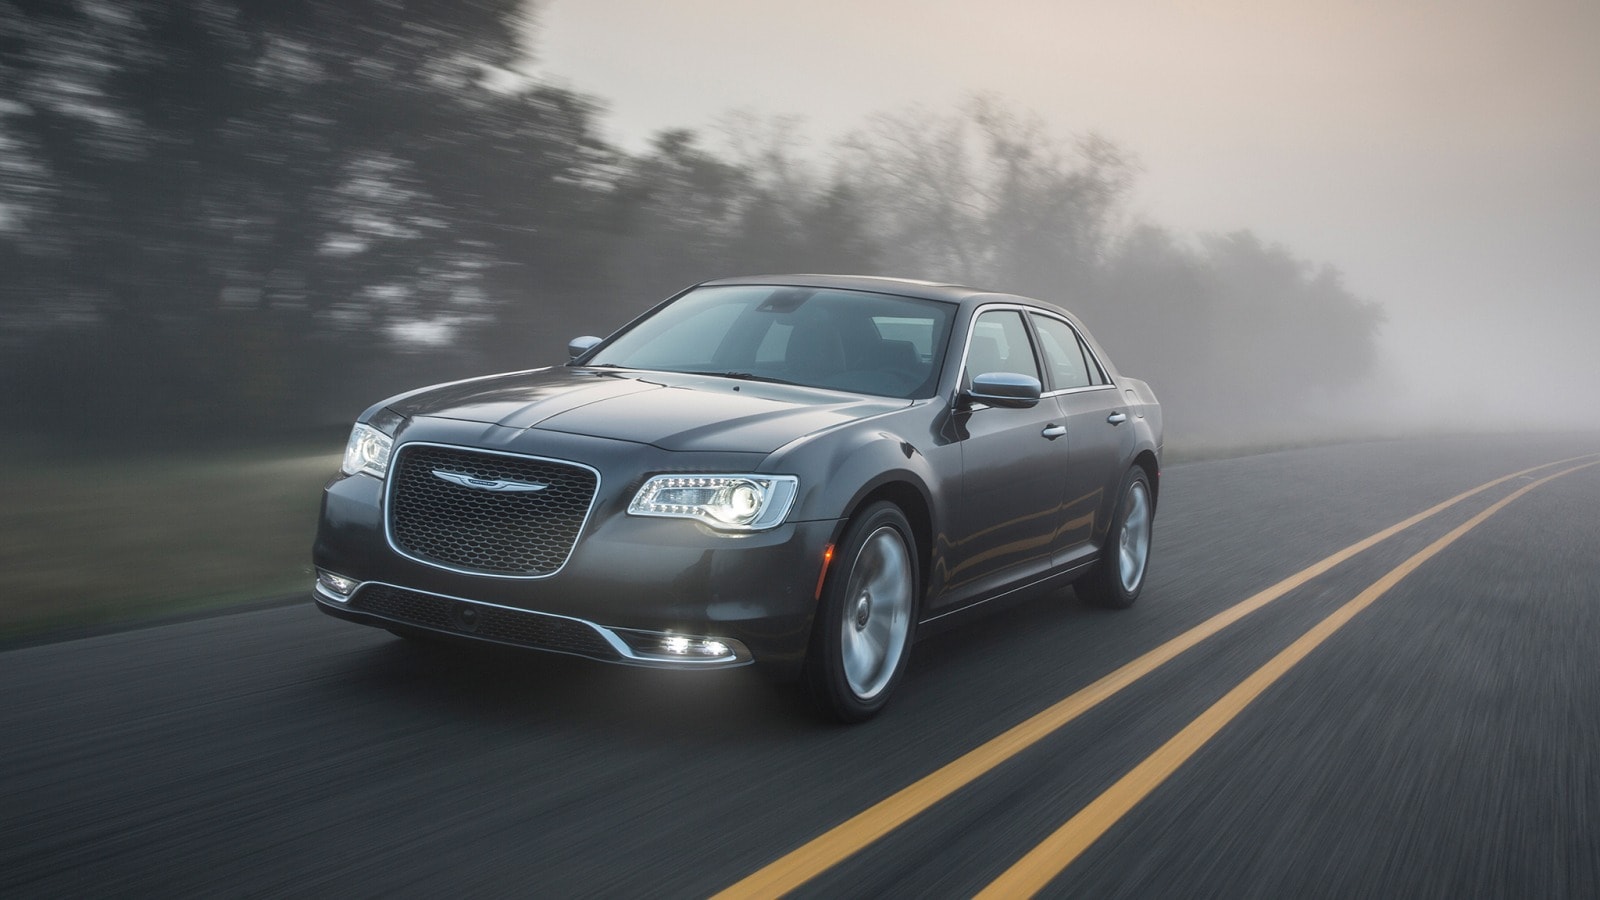 Used 2018 Chrysler 300 Limited Review & Ratings Edmunds